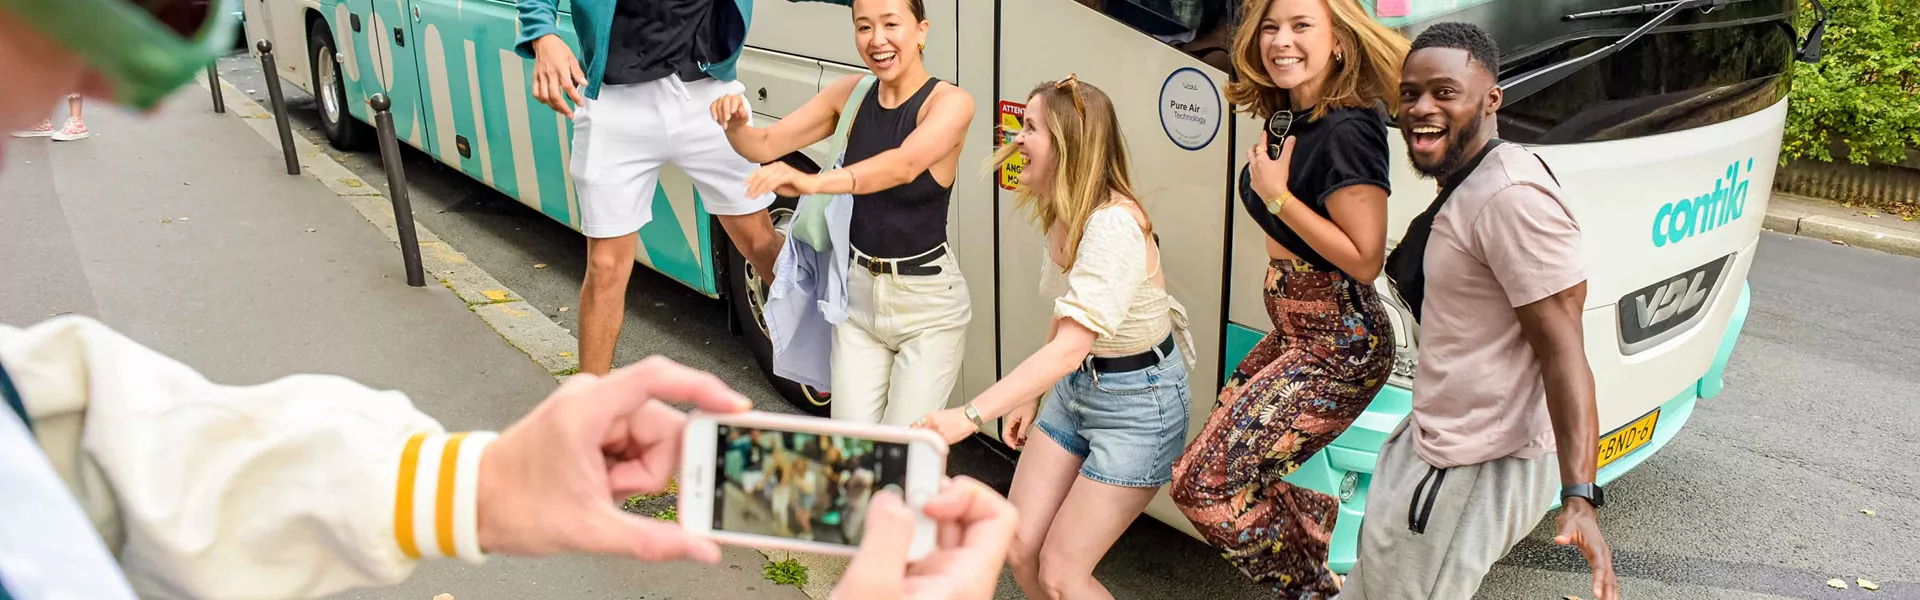 Group Of Young Travelers Having Fun Outside Of A Contiki Coach 2908EURS2022